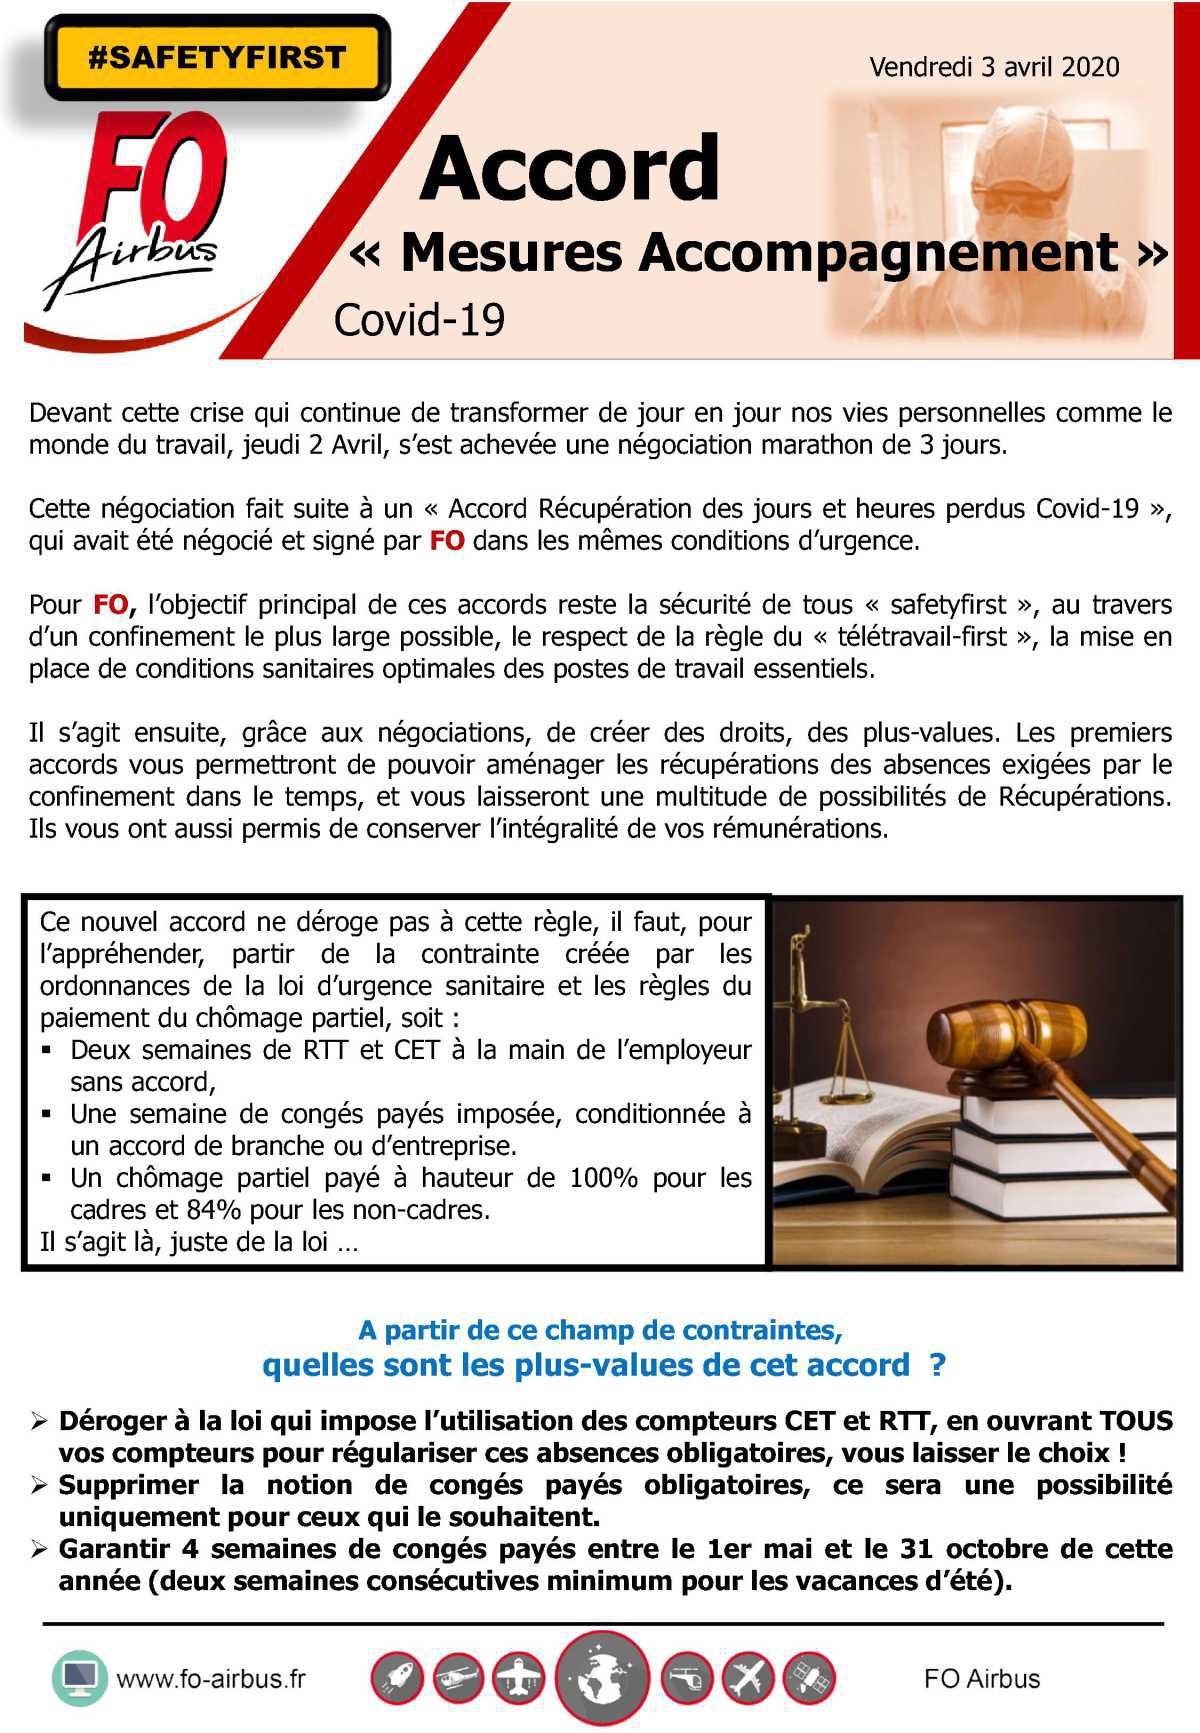 Mesures d'accompagnement / Covid-19